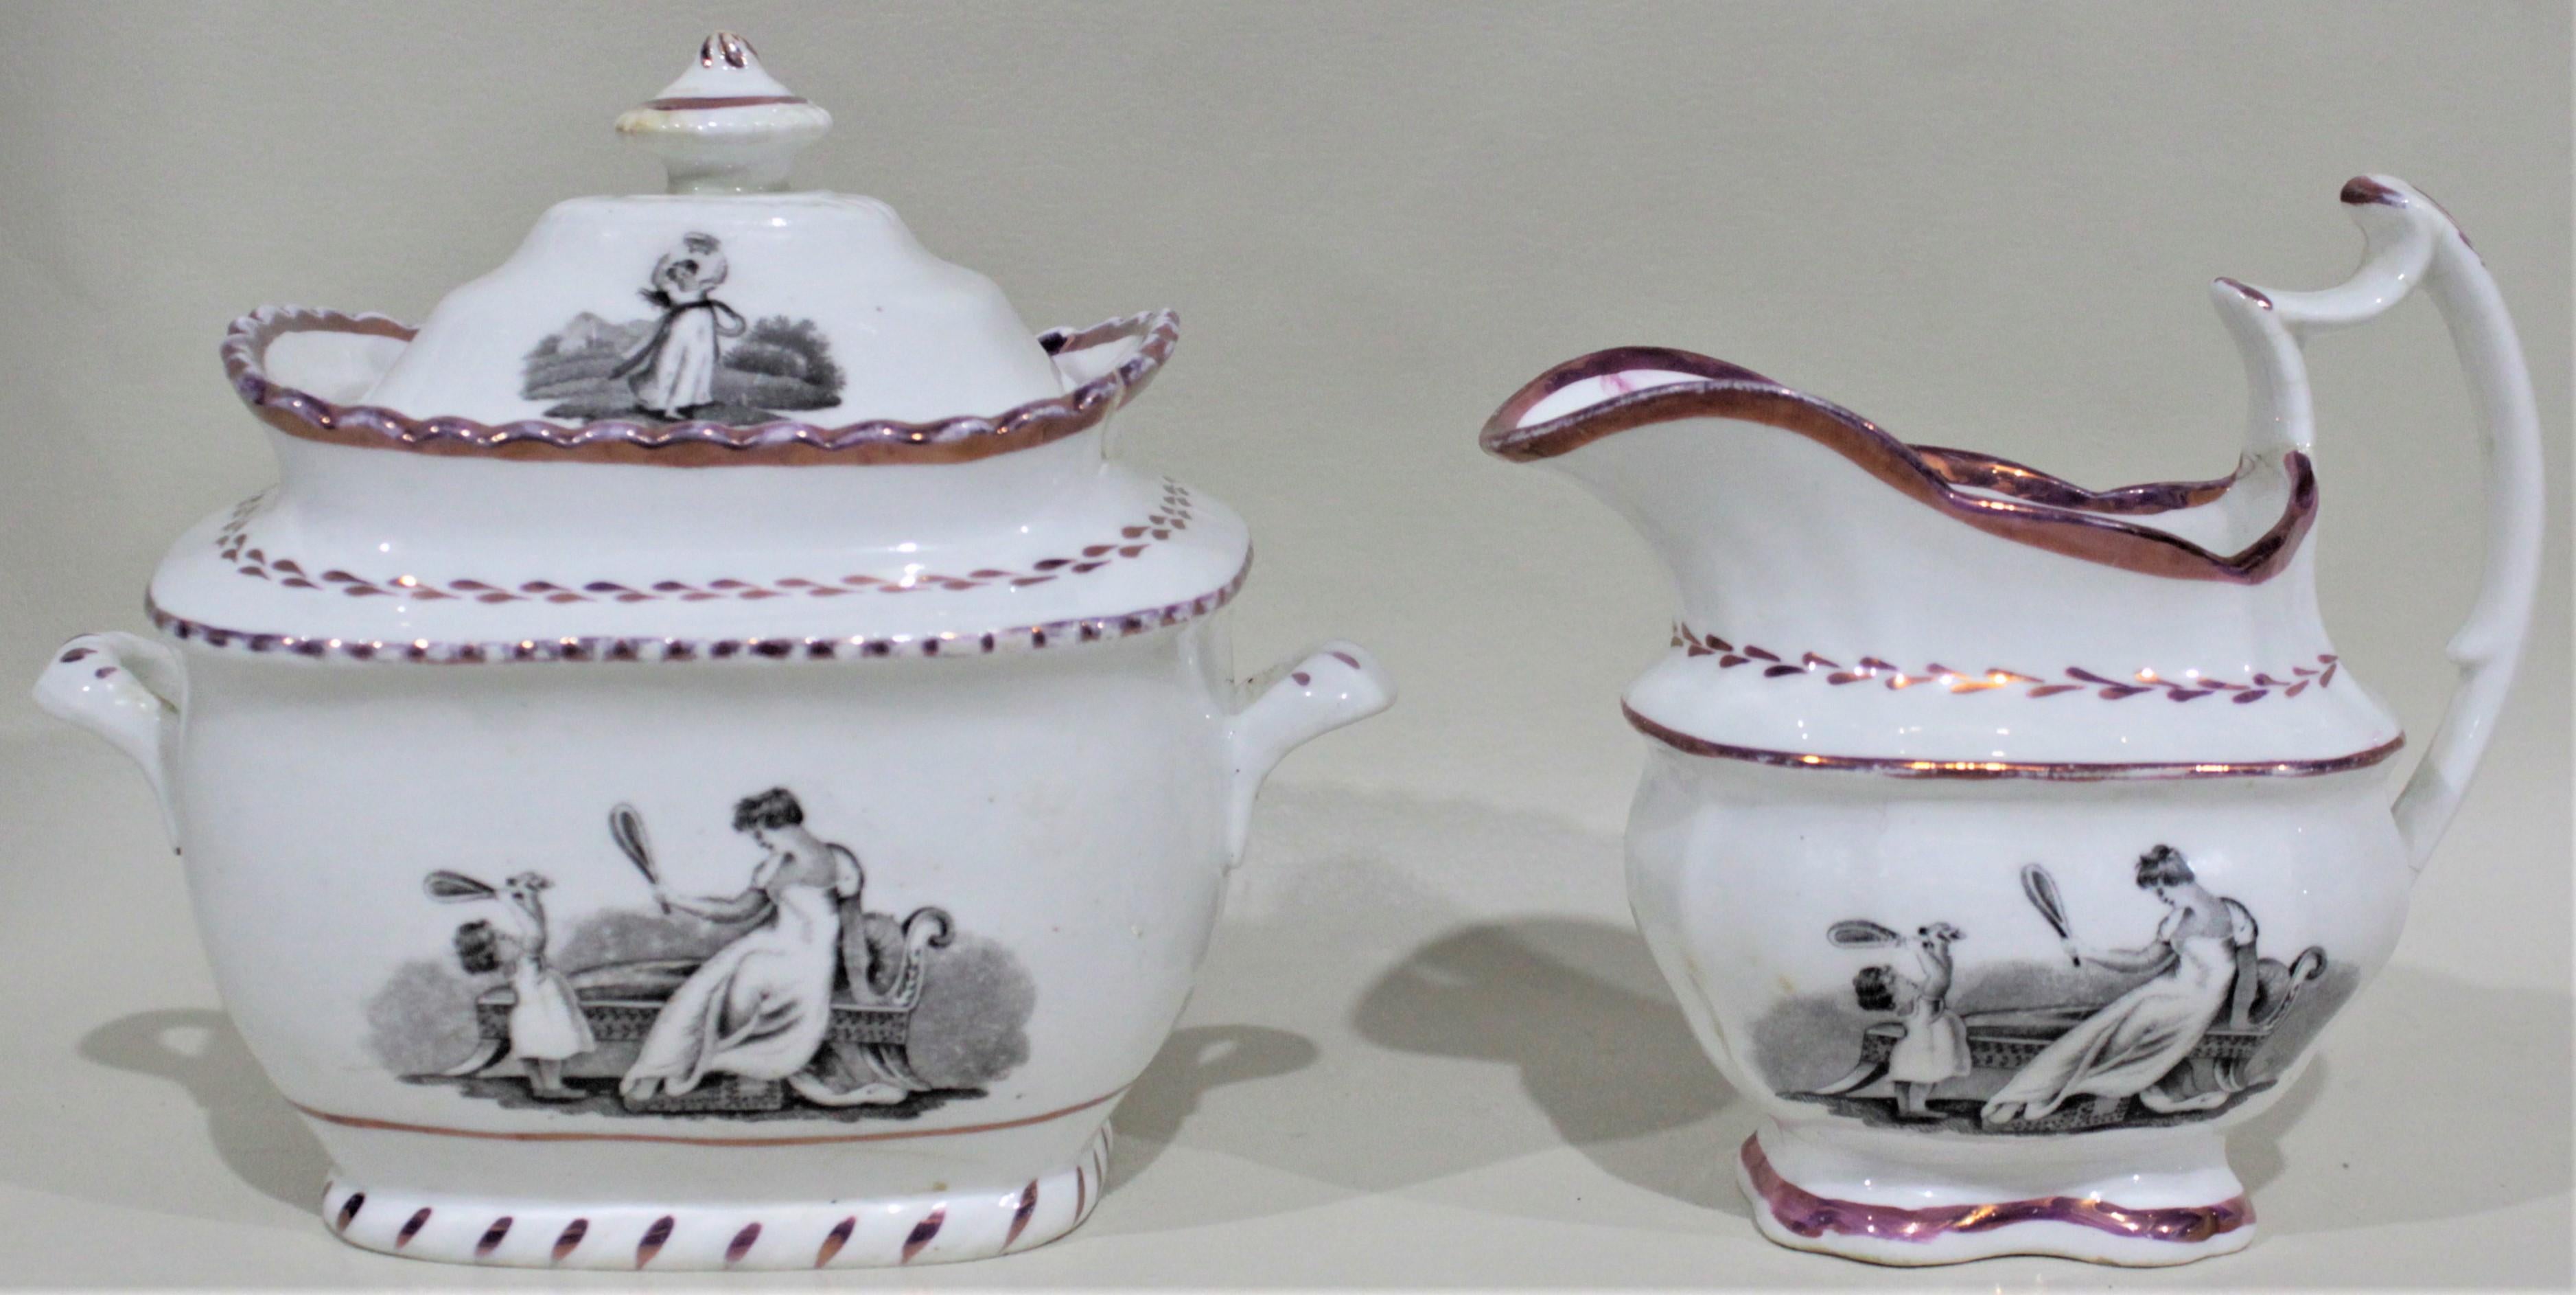 Antique Transferware China Desert or Luncheon Set of Mother and Children Playing For Sale 4